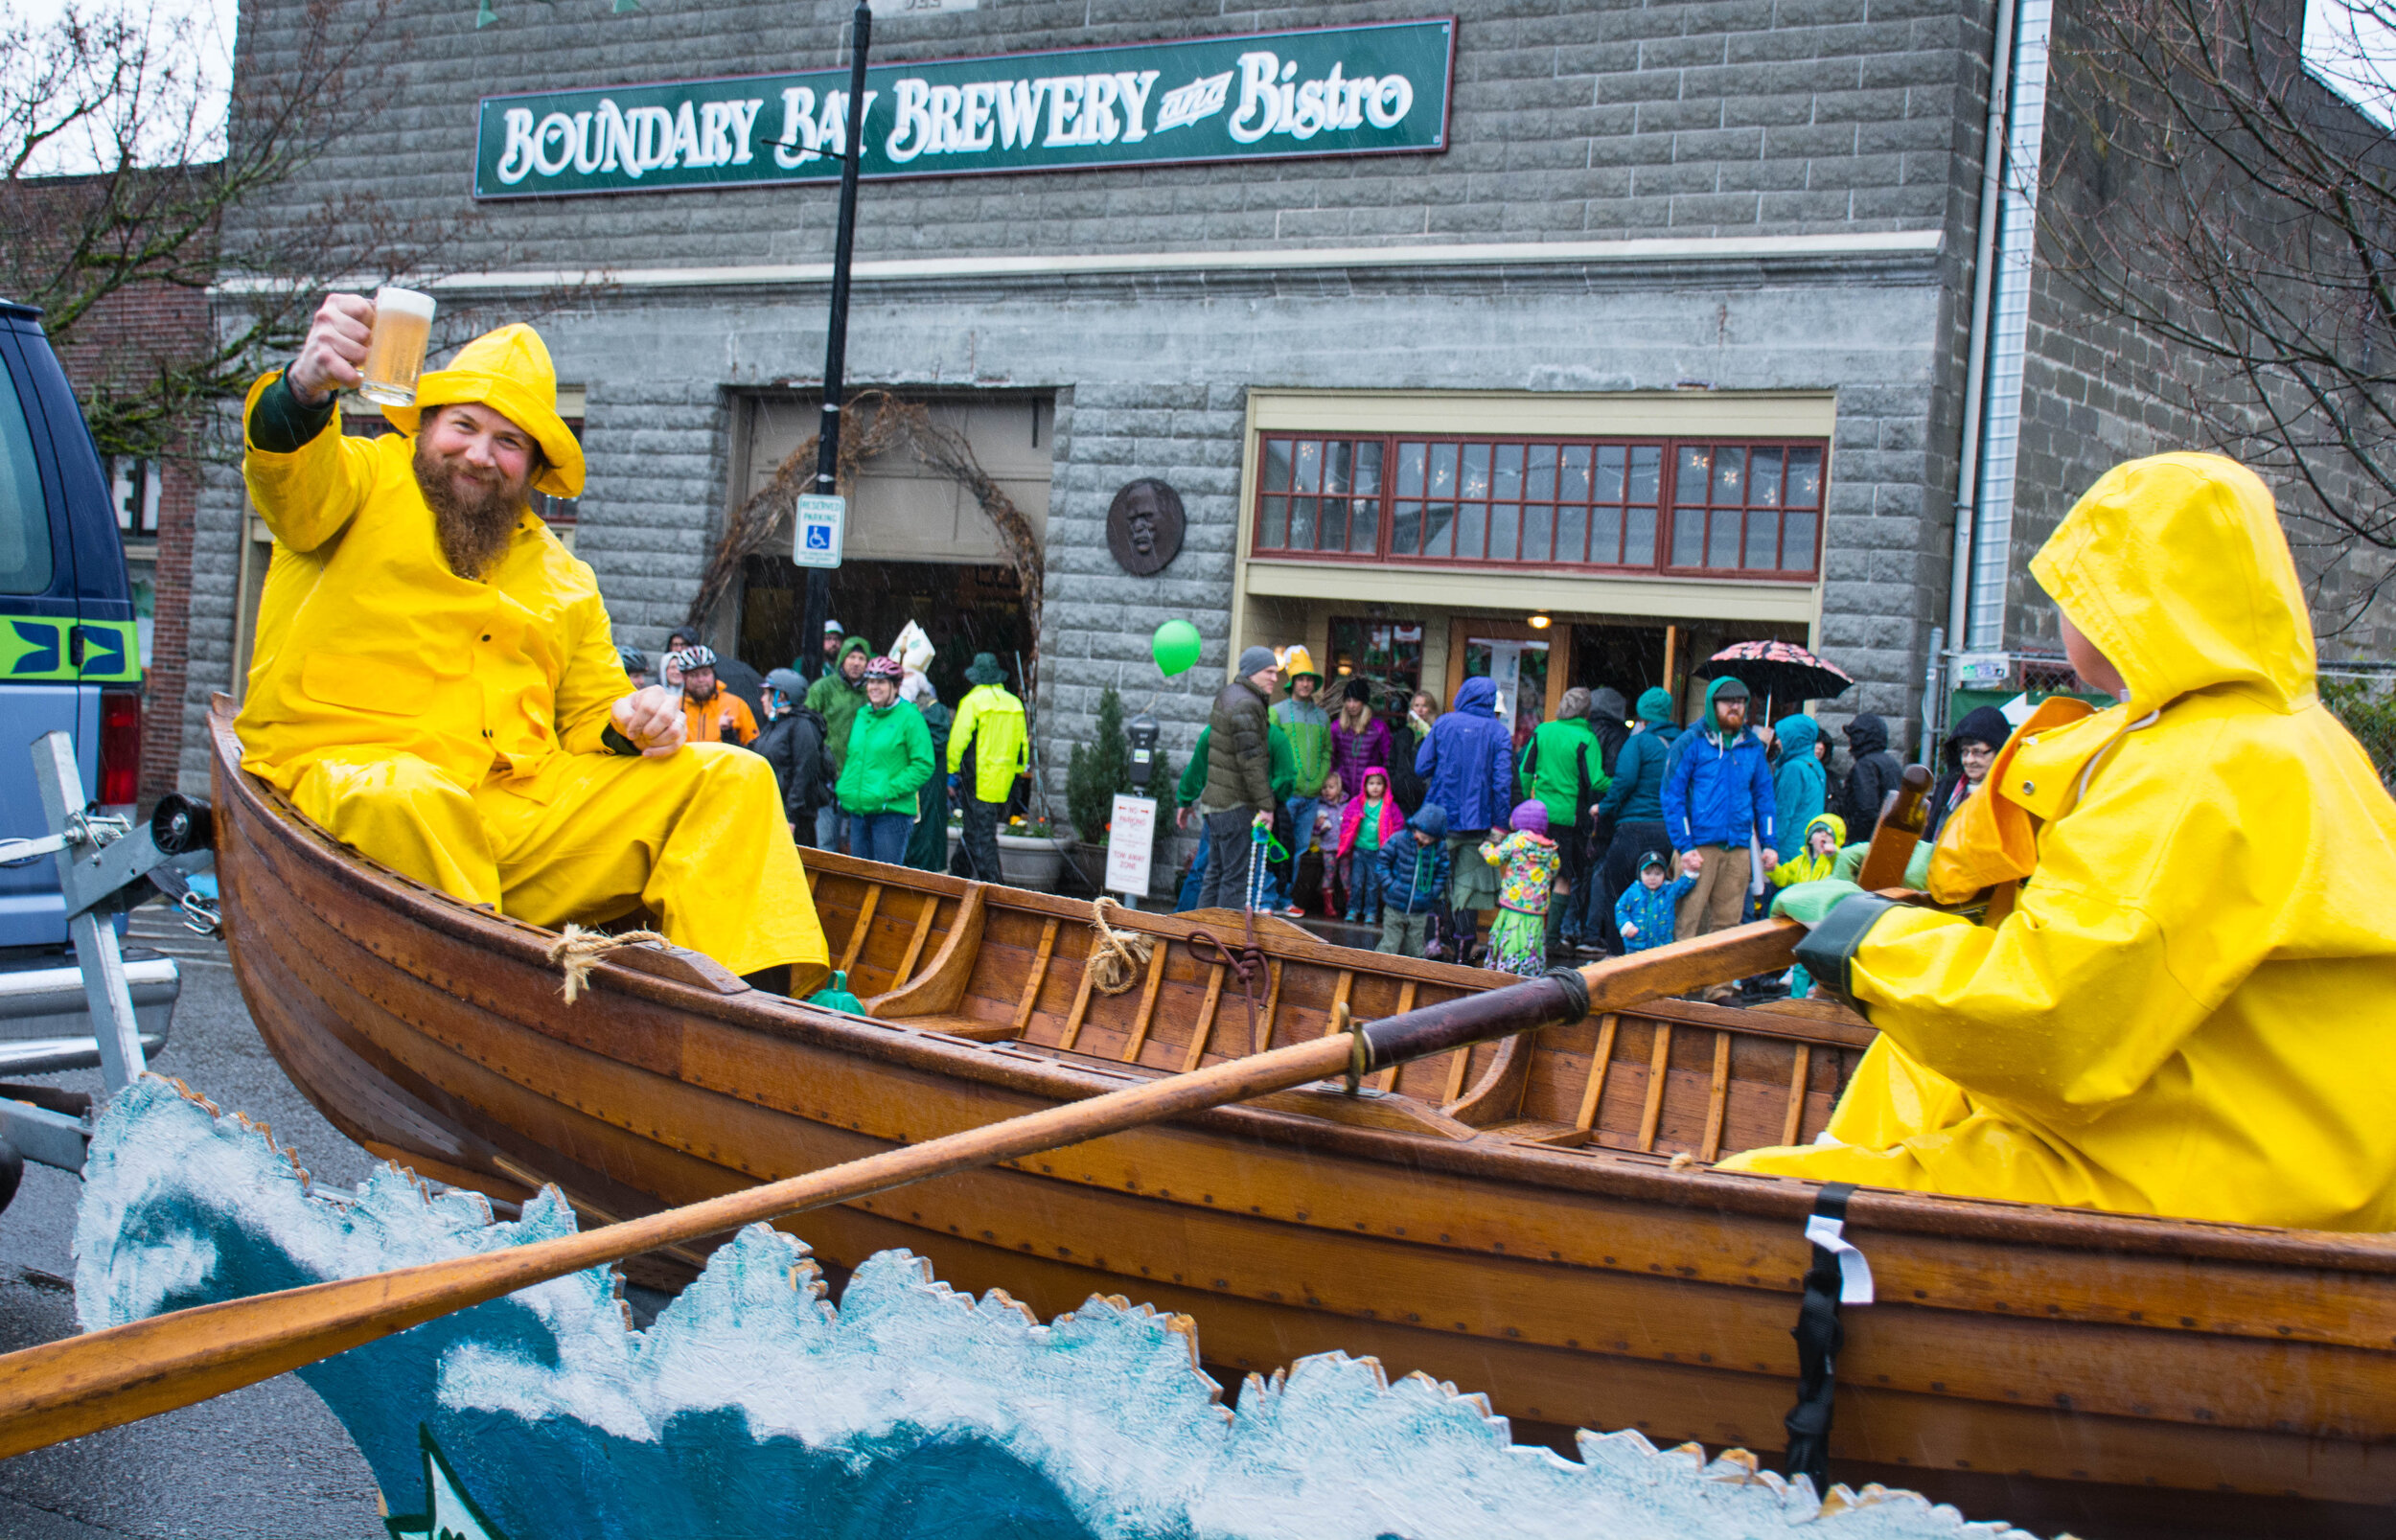 An image of Boundary Bay's "Boat Float" and its crew as it makes it's way to the end of the annual St. Patrick's Day parade. Boundary Bay Brewery can be seen in the backdrop.